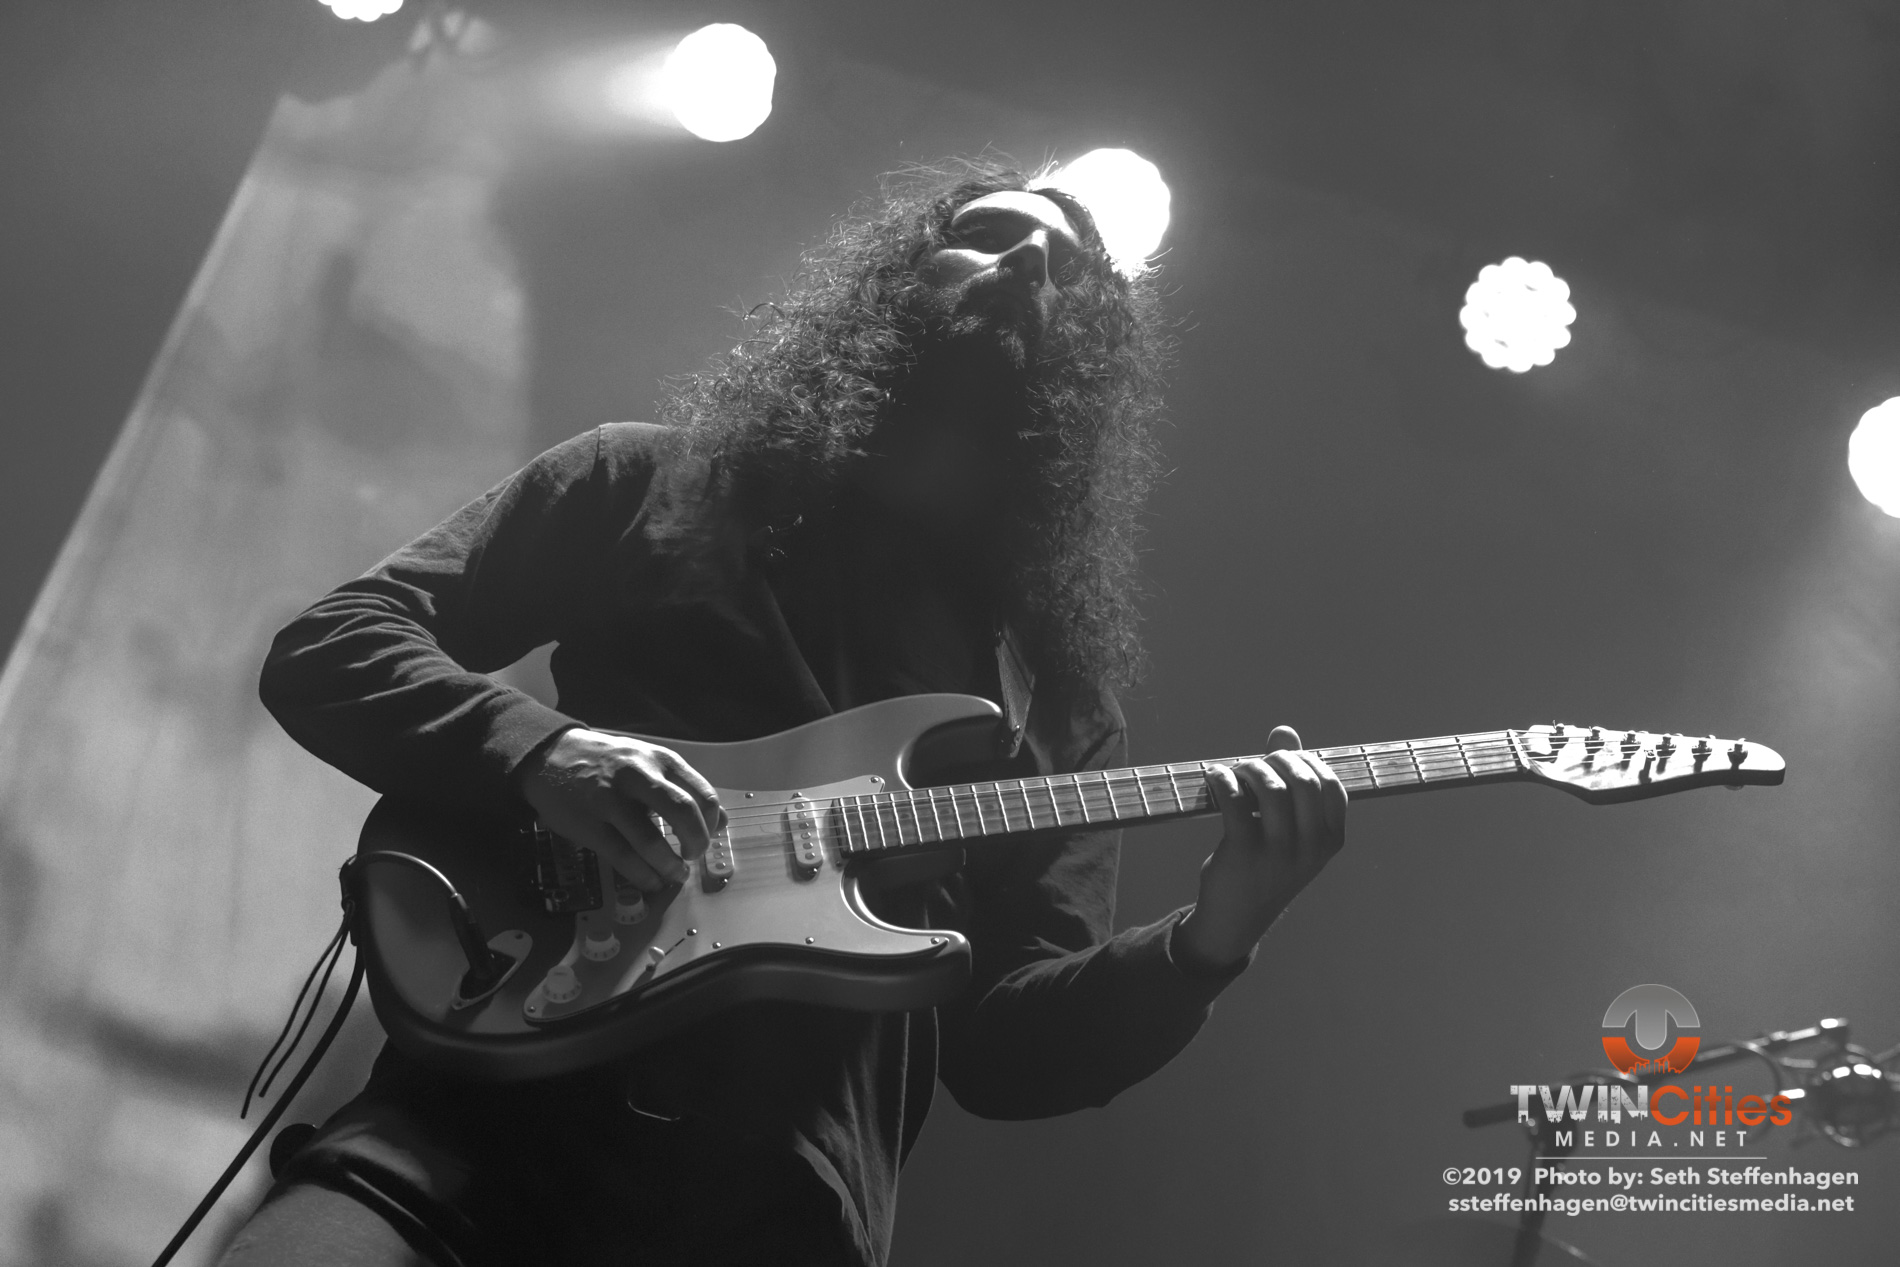 March 25, 2019 - Minneapolis, Minnesota, United States - Uncle Acid And The Deadbeats live in concert at First Avenue along with Graveyard and Demob Happy as the openers.

(Photo by Seth Steffenhagen/Steffenhagen Photography)